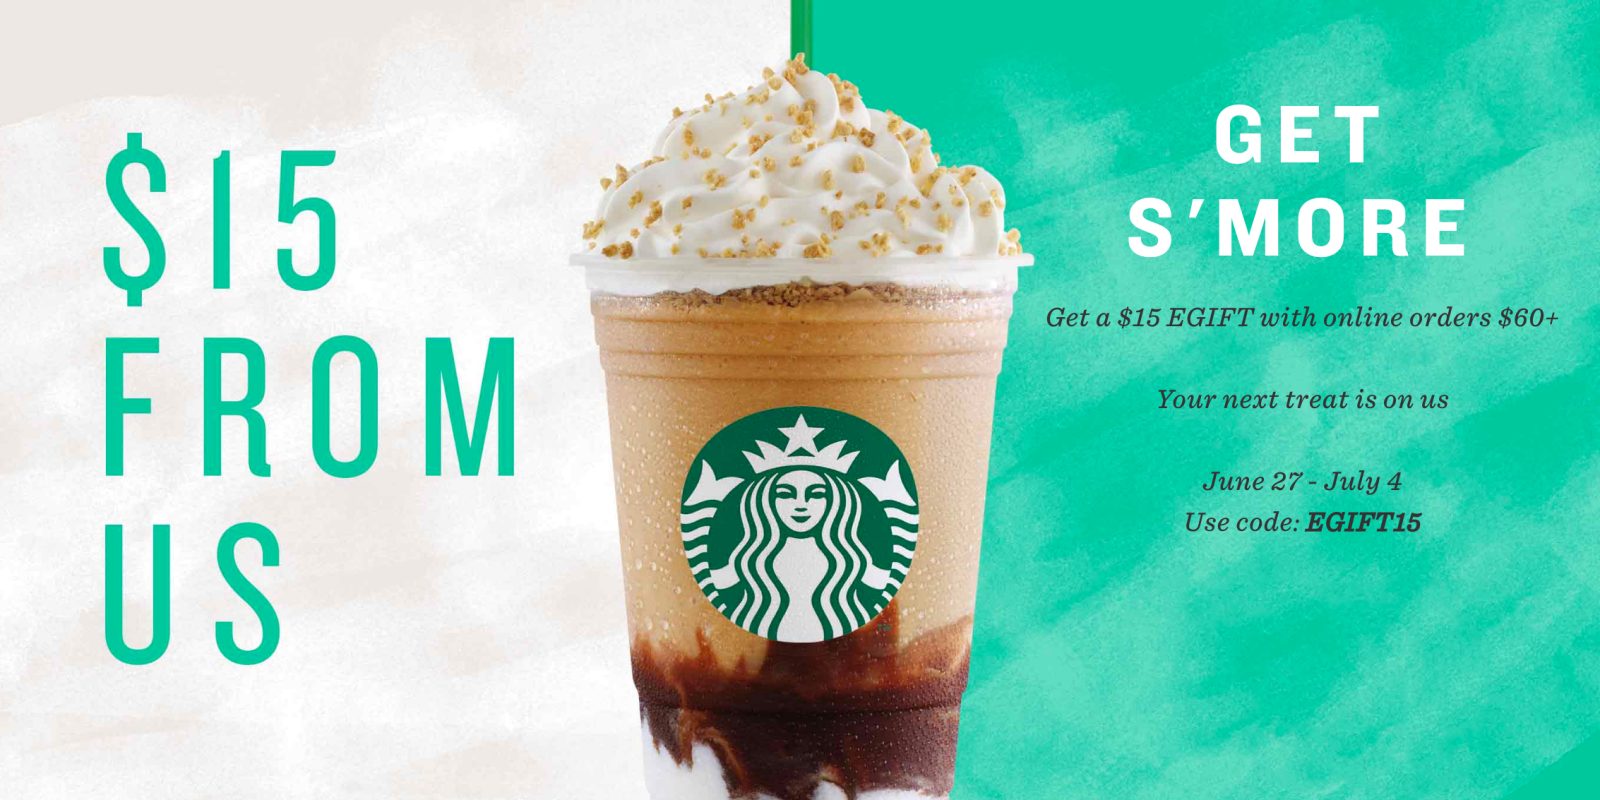 Starbucks offers a 15 eGift Card with a 60 purchase